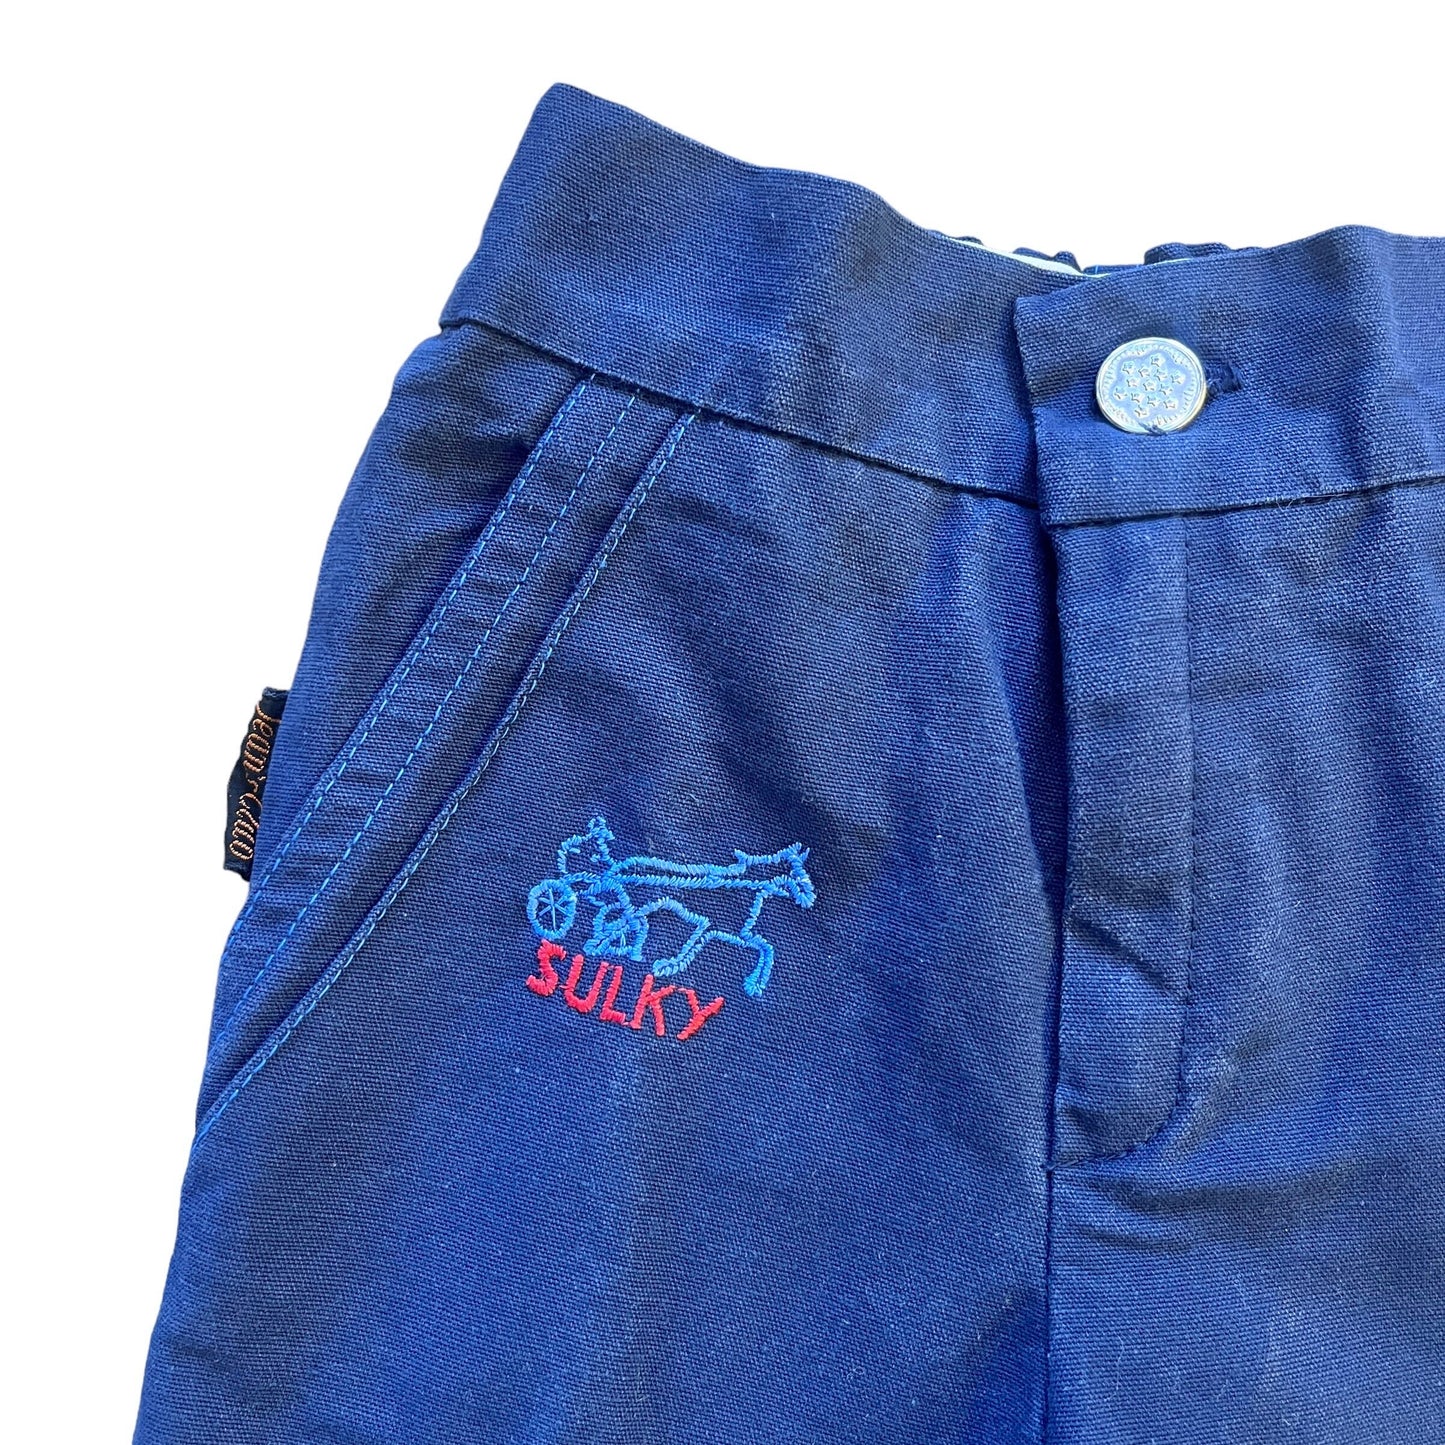 1970s Navy Trousers / 18-24M